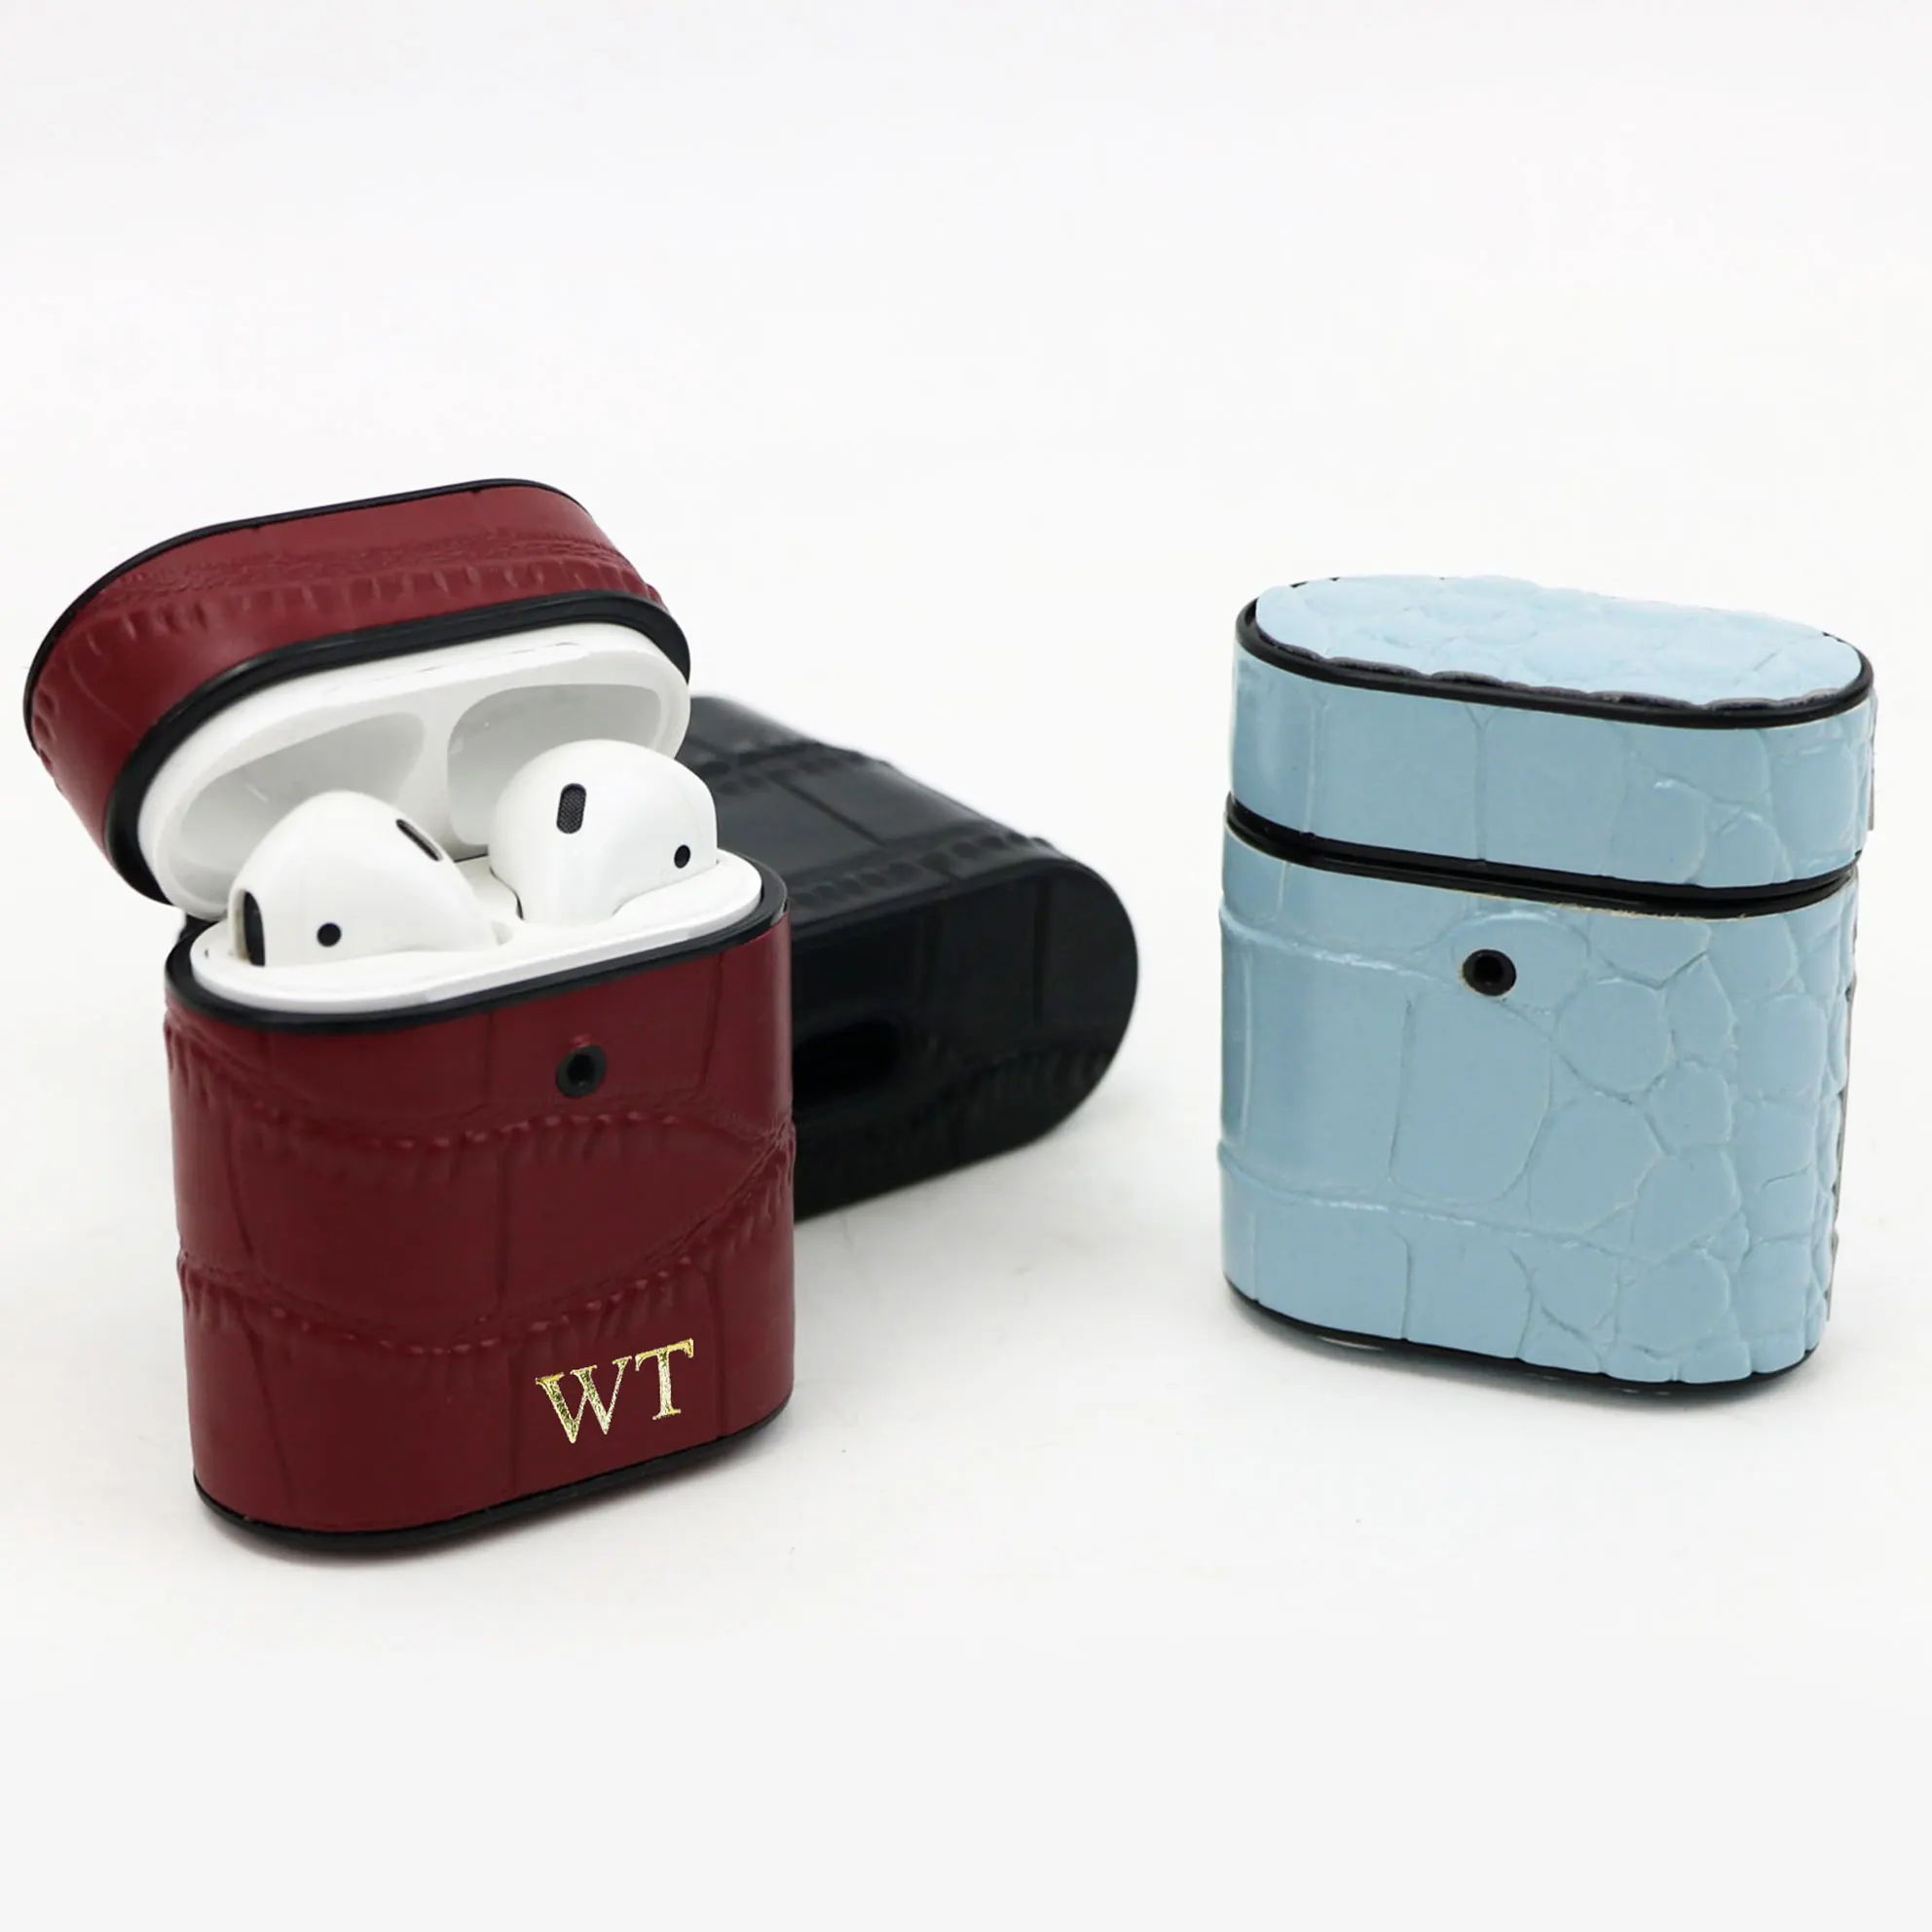 New Custom Crocodile Case For Airpods Apple Bluetooth Wireless Ear Phone Cover For Air Pod 1/2 Pro Leather Protect Sleeve Box